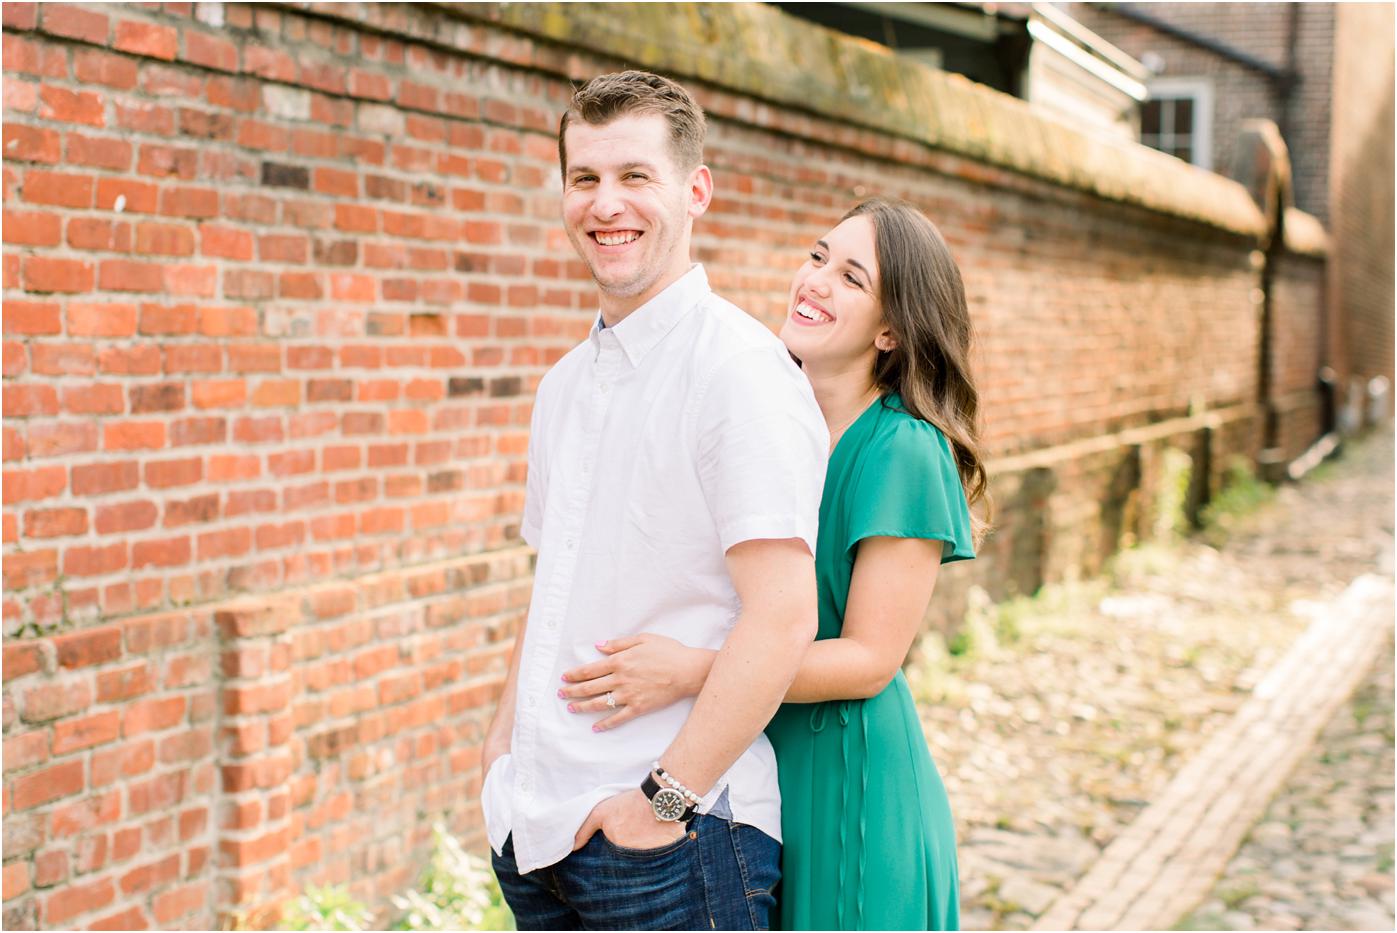 old-town-alexandria-engagement-photo_0287.jpg